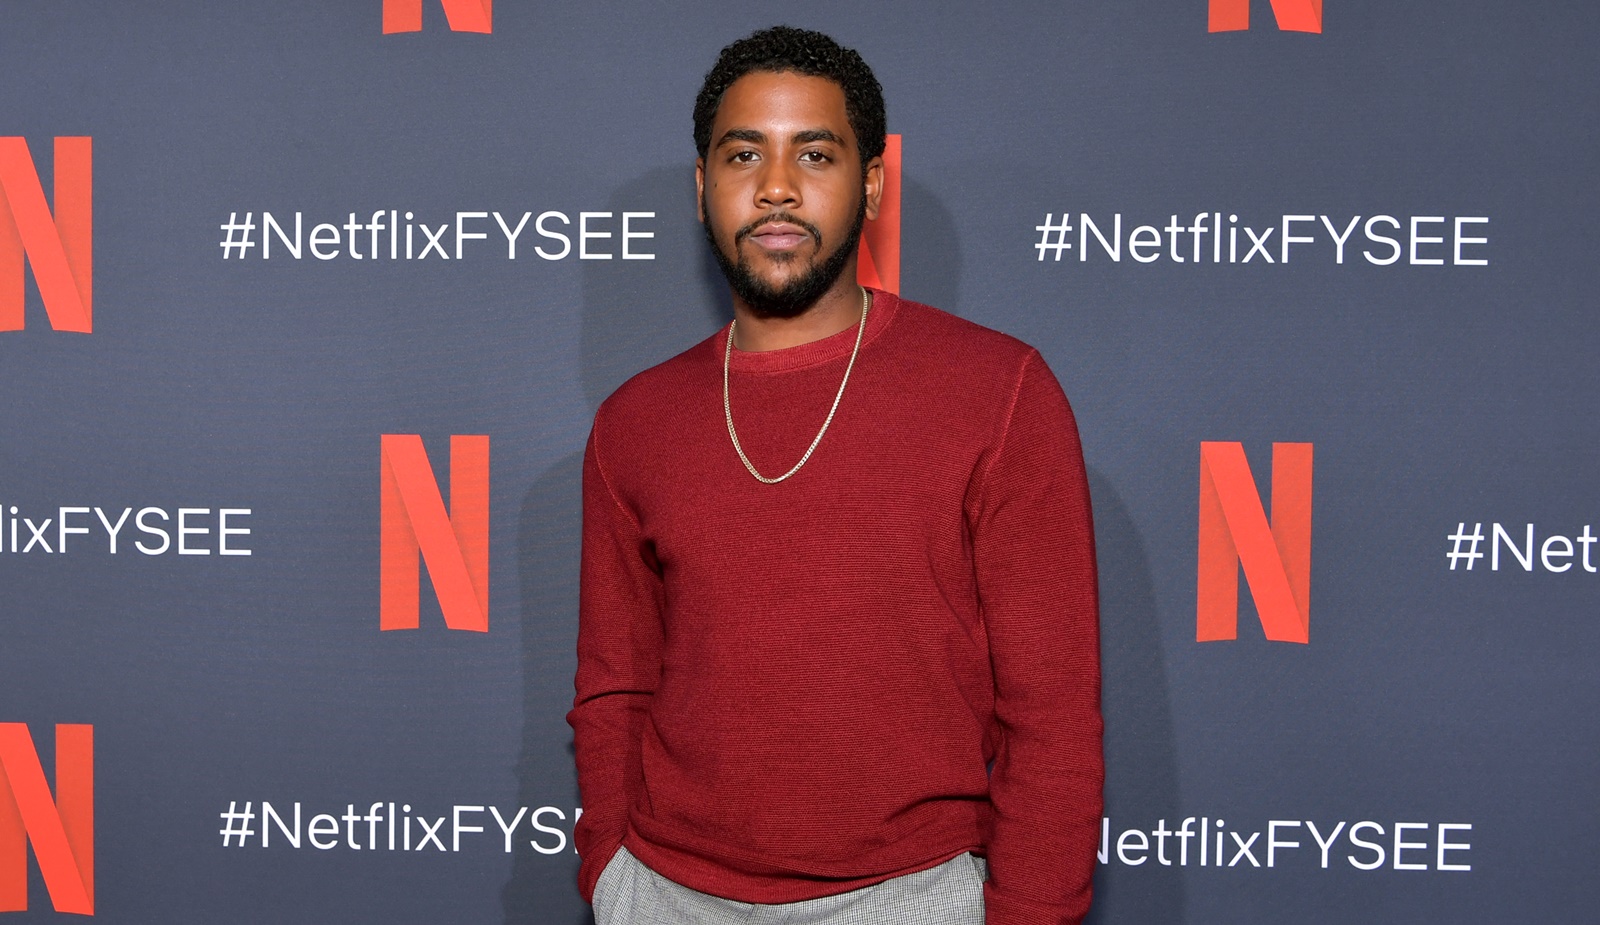 Jharrel Jerome Wiki: Korey Wise on “When They See Us”, Age, Family, Education